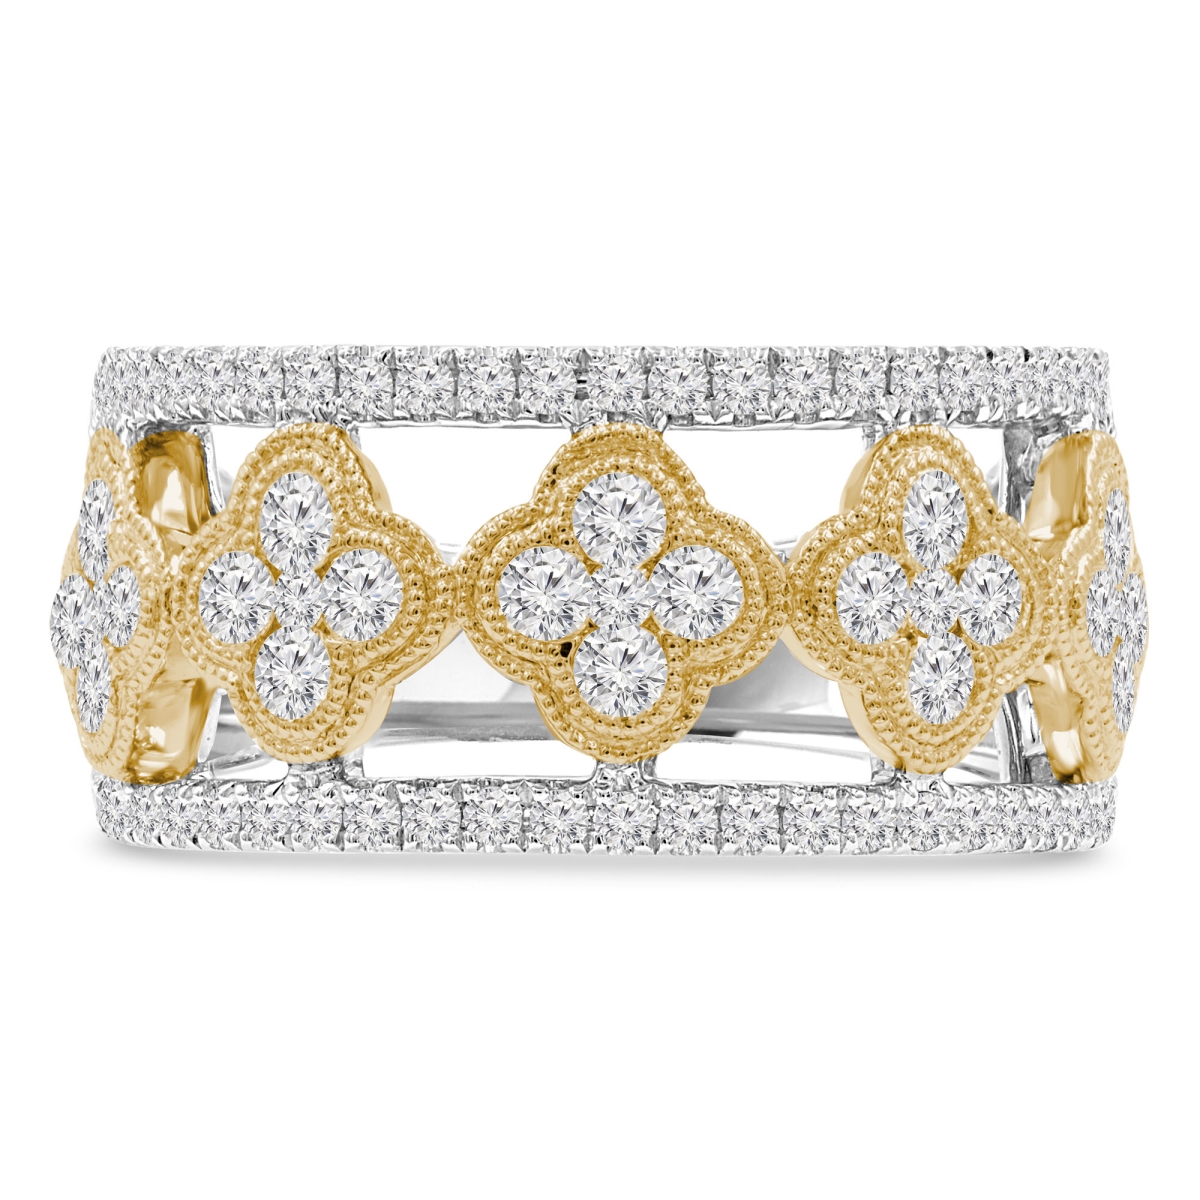 Picture of Majesty Diamonds MDR210140-7.5 1 CTW Round Diamond Cocktail Ring in 14K Two-Tone Gold - Size 7.5